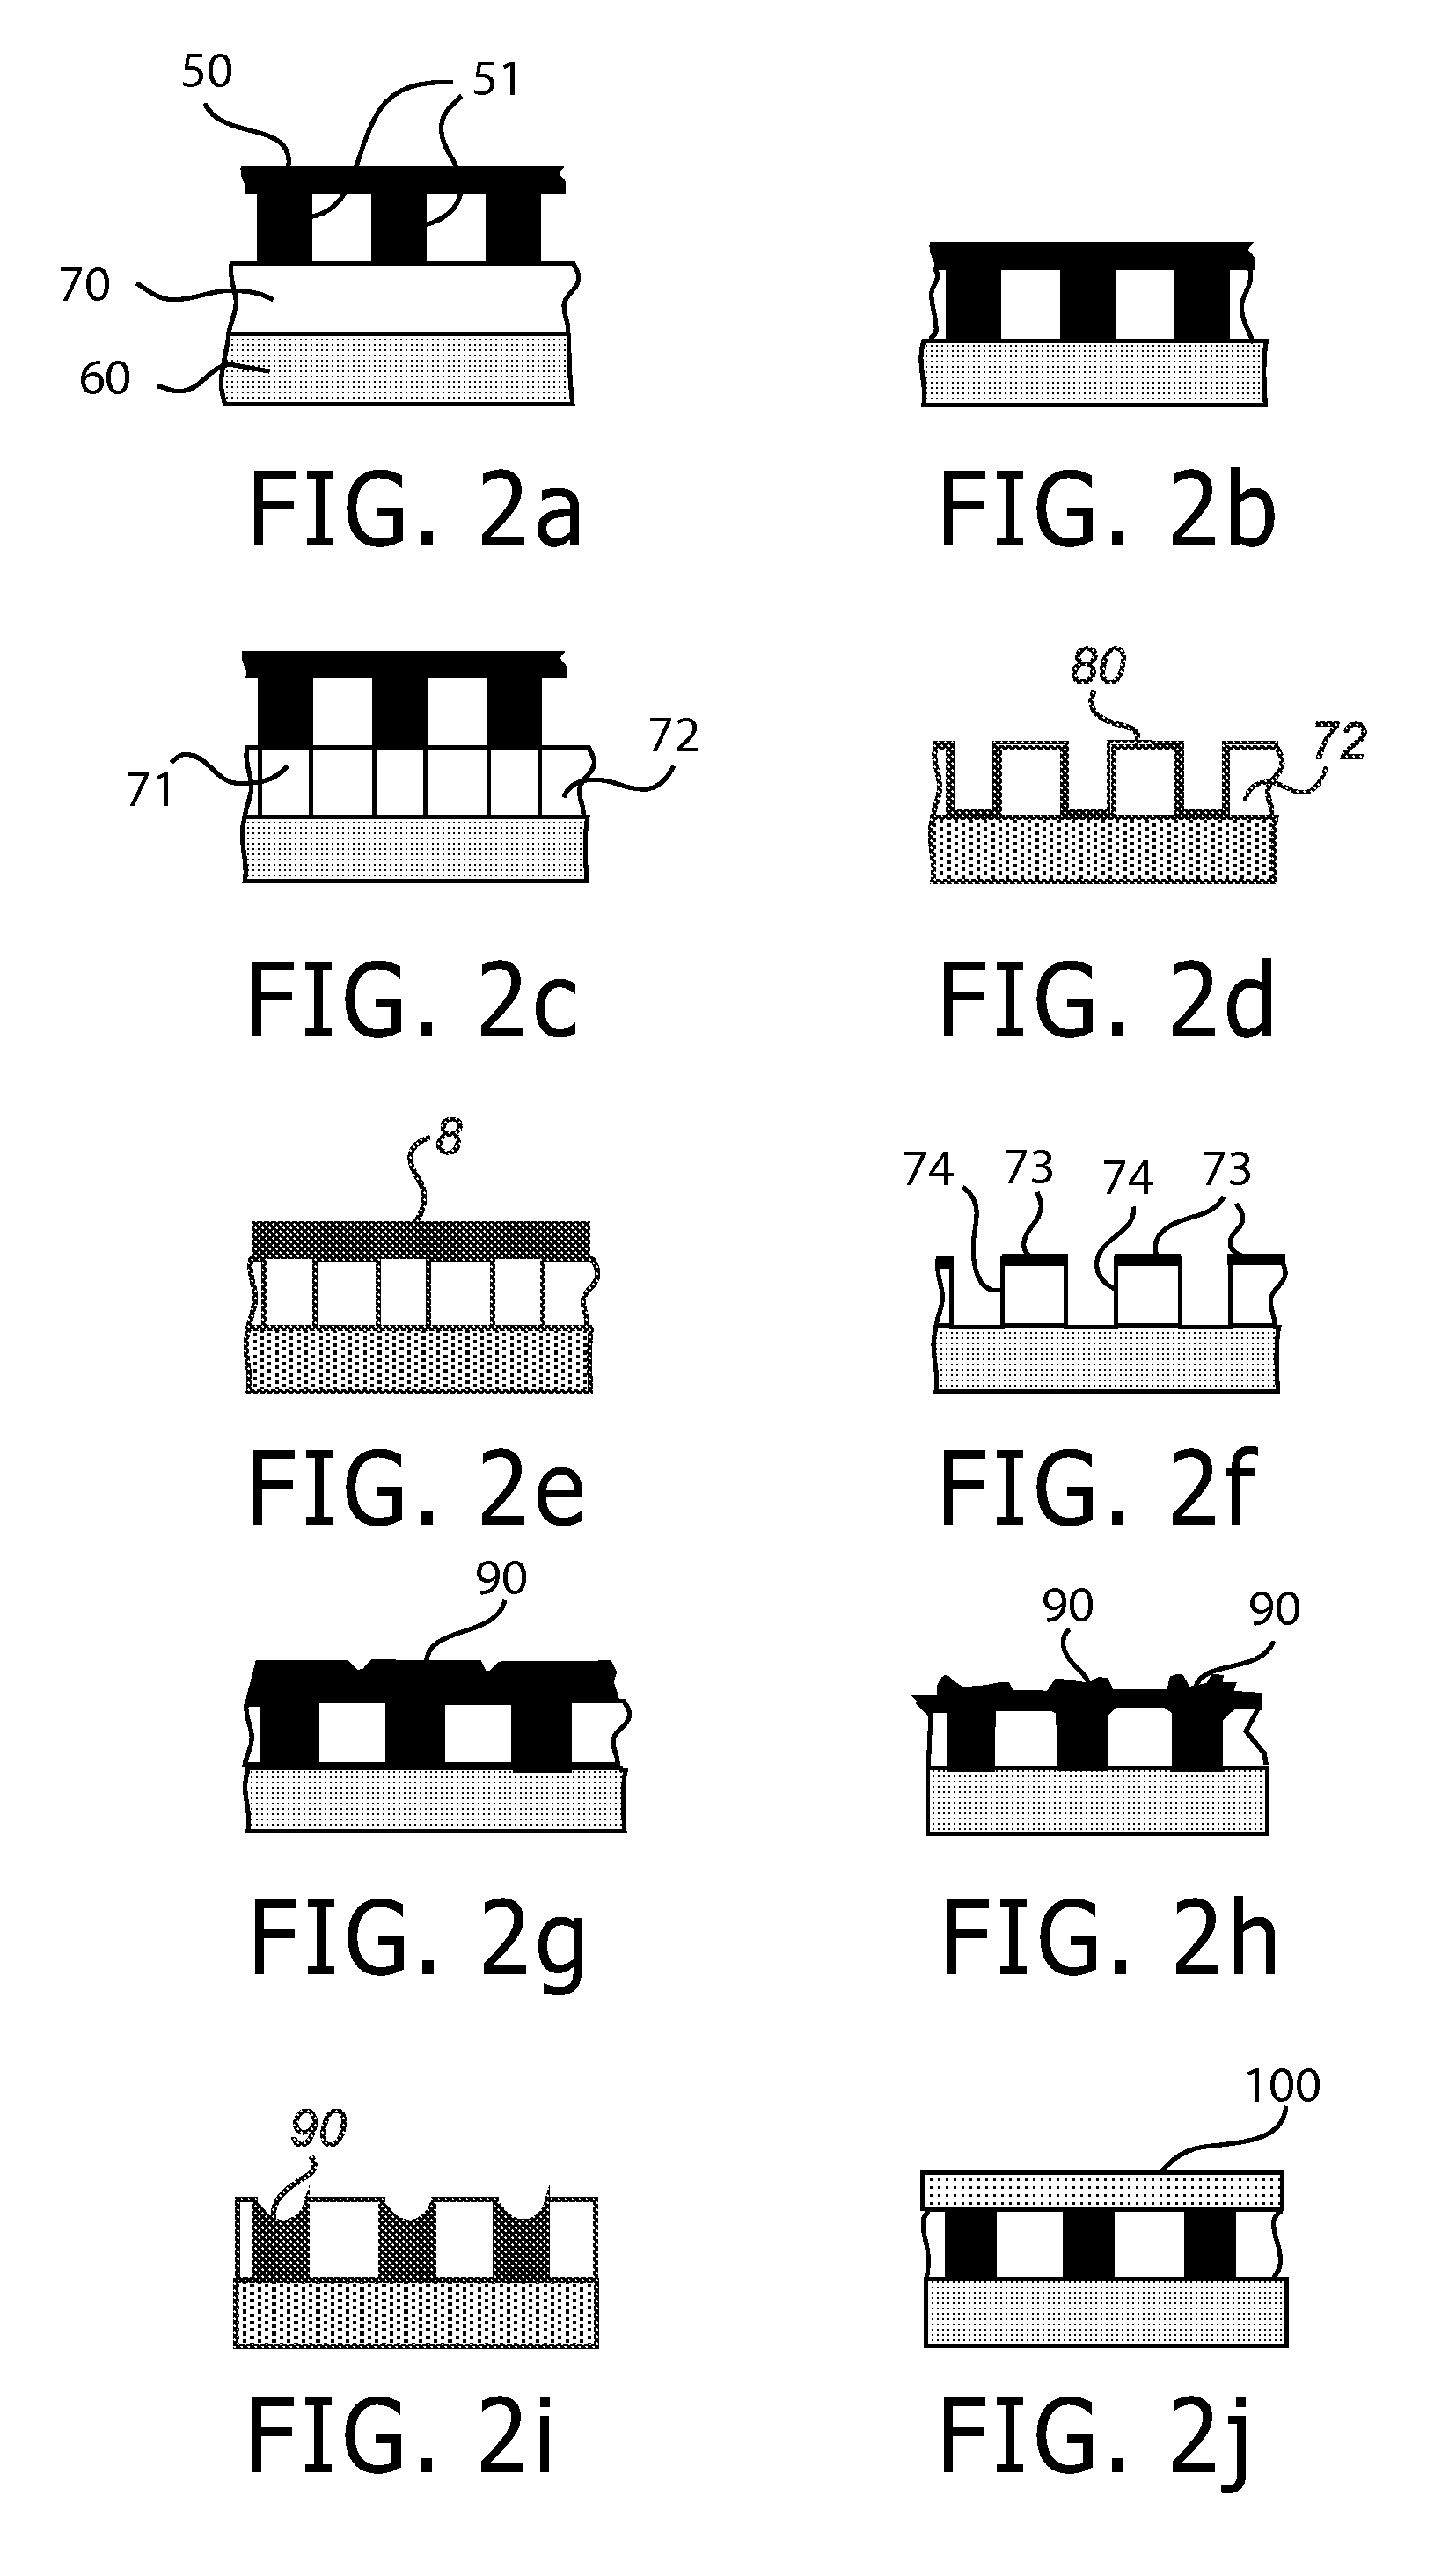 Method for forming a patterned layer on a substrate